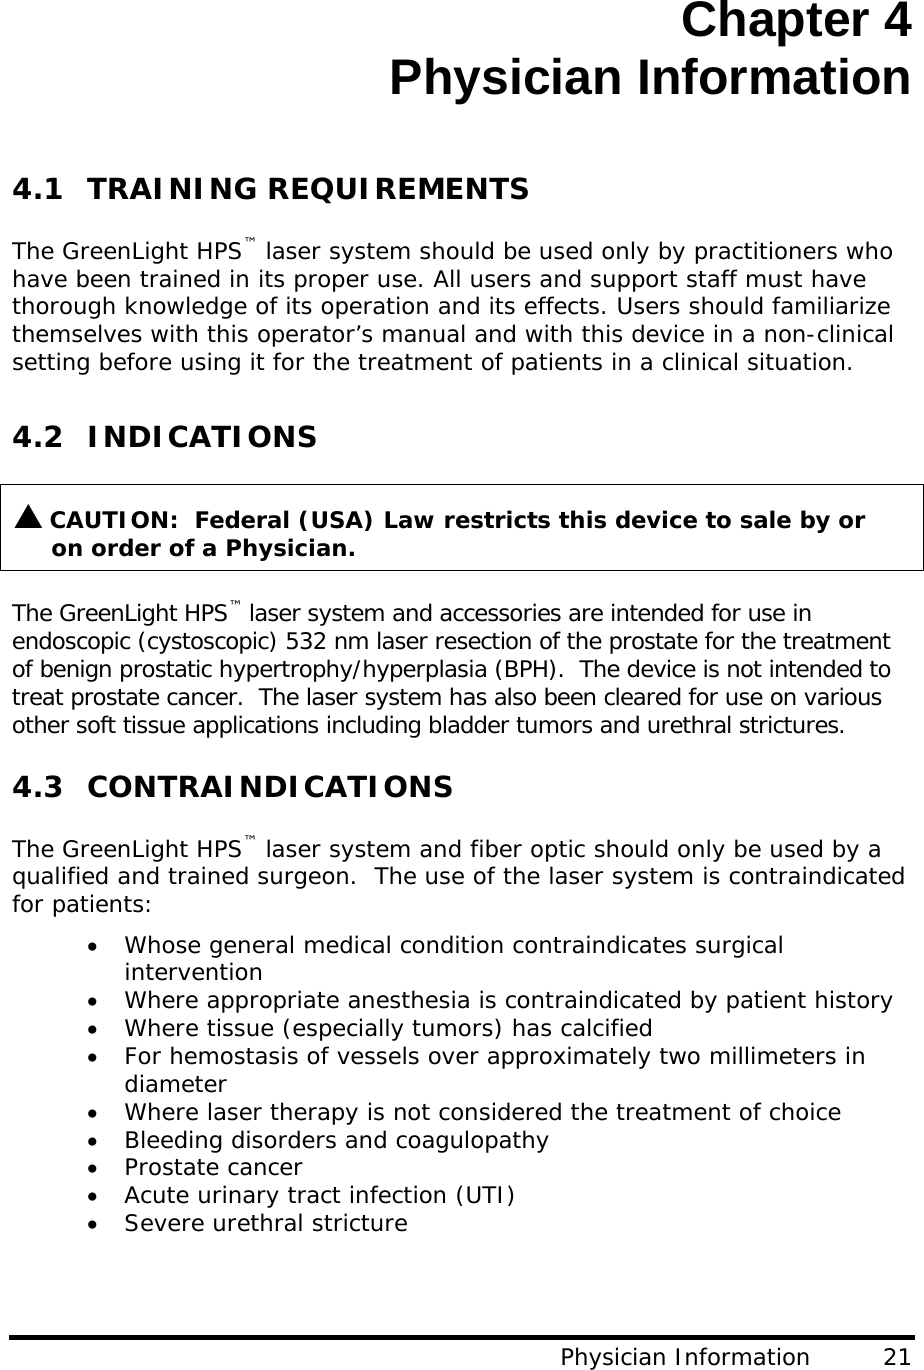 Chapter 4 Physician Information  4.1 TRAINING REQUIREMENTS  The GreenLight HPS™ laser system should be used only by practitioners who have been trained in its proper use. All users and support staff must have thorough knowledge of its operation and its effects. Users should familiarize themselves with this operator’s manual and with this device in a non-clinical setting before using it for the treatment of patients in a clinical situation.  4.2 INDICATIONS   S CAUTION:  Federal (USA) Law restricts this device to sale by or           on order of a Physician.  The GreenLight HPS™ laser system and accessories are intended for use in endoscopic (cystoscopic) 532 nm laser resection of the prostate for the treatment of benign prostatic hypertrophy/hyperplasia (BPH).  The device is not intended to treat prostate cancer.  The laser system has also been cleared for use on various other soft tissue applications including bladder tumors and urethral strictures.  4.3 CONTRAINDICATIONS   The GreenLight HPS™ laser system and fiber optic should only be used by a qualified and trained surgeon.  The use of the laser system is contraindicated for patients: • Whose general medical condition contraindicates surgical intervention • Where appropriate anesthesia is contraindicated by patient history • Where tissue (especially tumors) has calcified • For hemostasis of vessels over approximately two millimeters in diameter • Where laser therapy is not considered the treatment of choice • Bleeding disorders and coagulopathy • Prostate cancer • Acute urinary tract infection (UTI) • Severe urethral stricture  Physician Information         21 